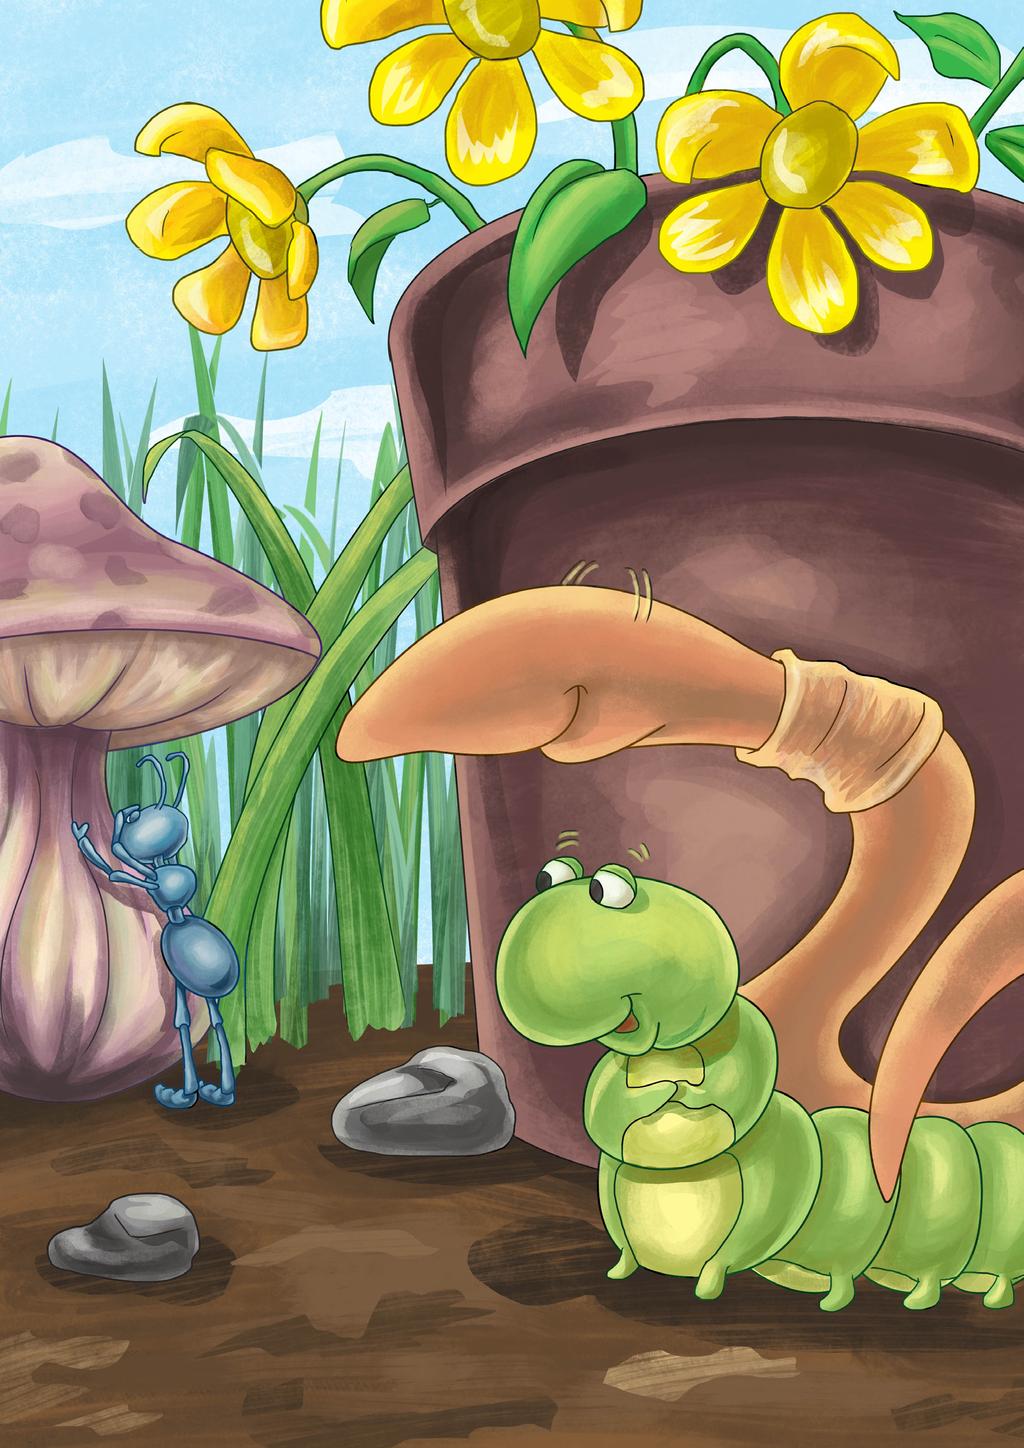 Wiggly and Tibs hid behind a small potted plant nearby. It seemed like it was taking forever for Hamilton to find them. "I'm going to see if Hamilton is coming," Wiggly whispered.